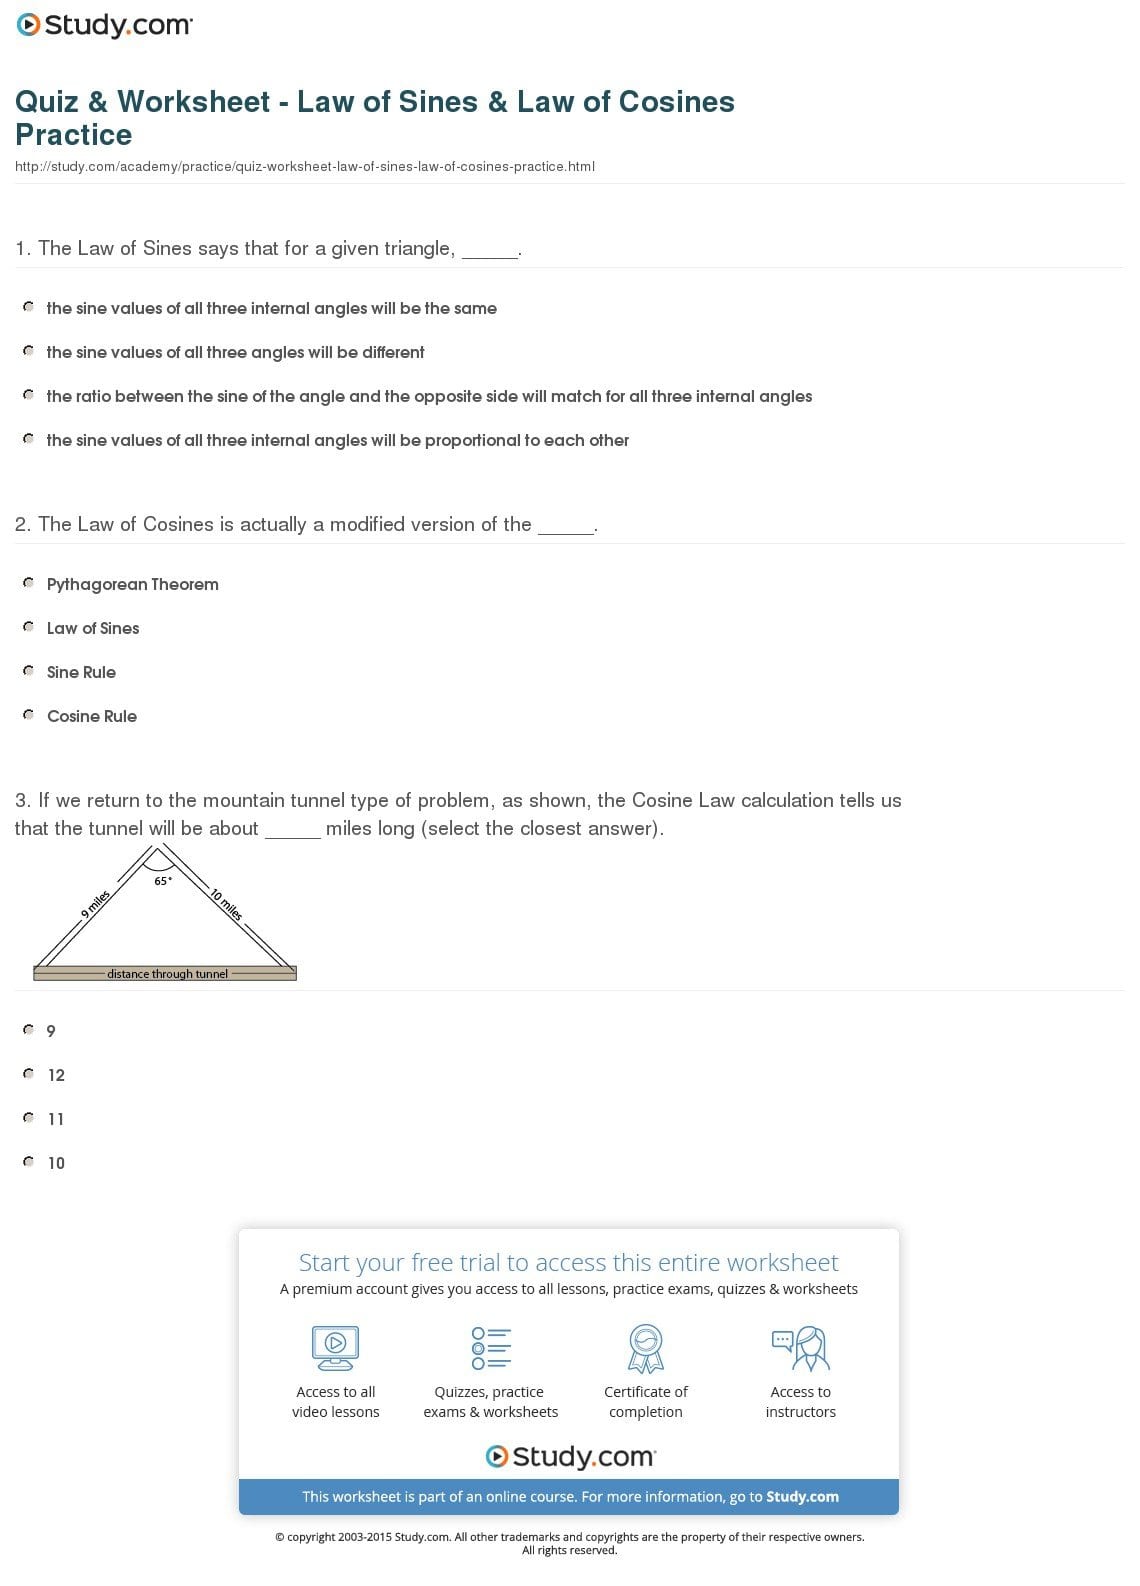 Quiz  Worksheet  Law Of Sines  Law Of Cosines Practice  Study And The Law Of Sines Worksheet